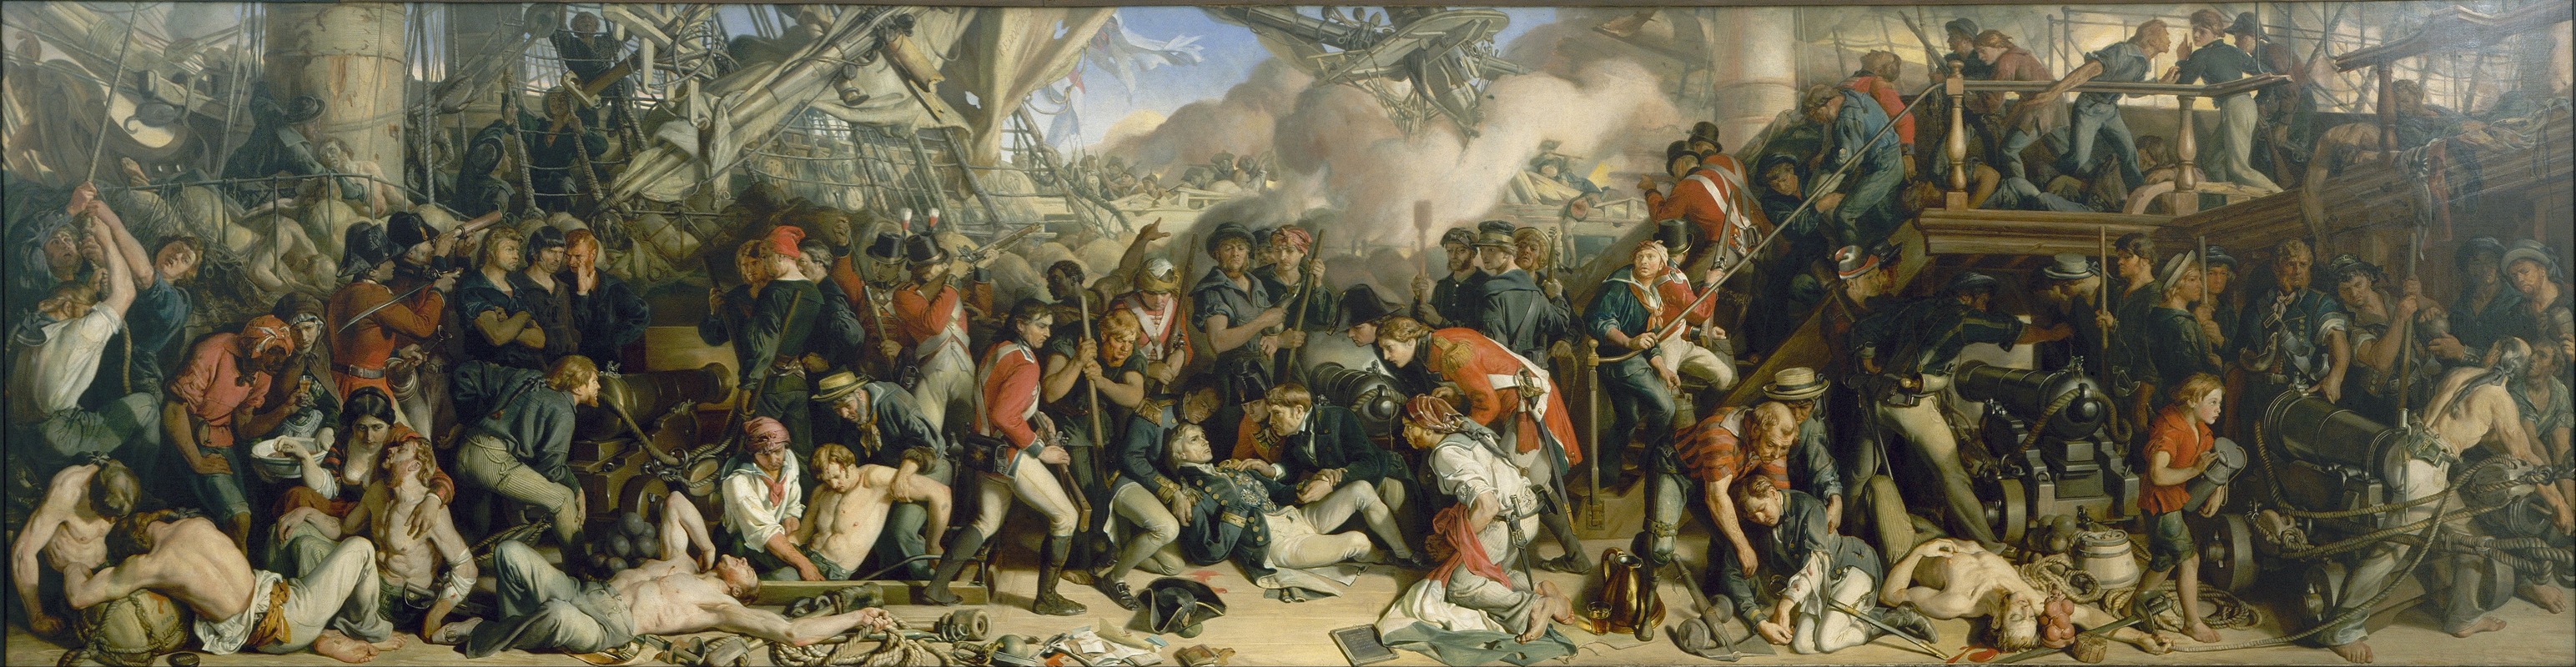 Daniel Maclise - The Death Of Nelson